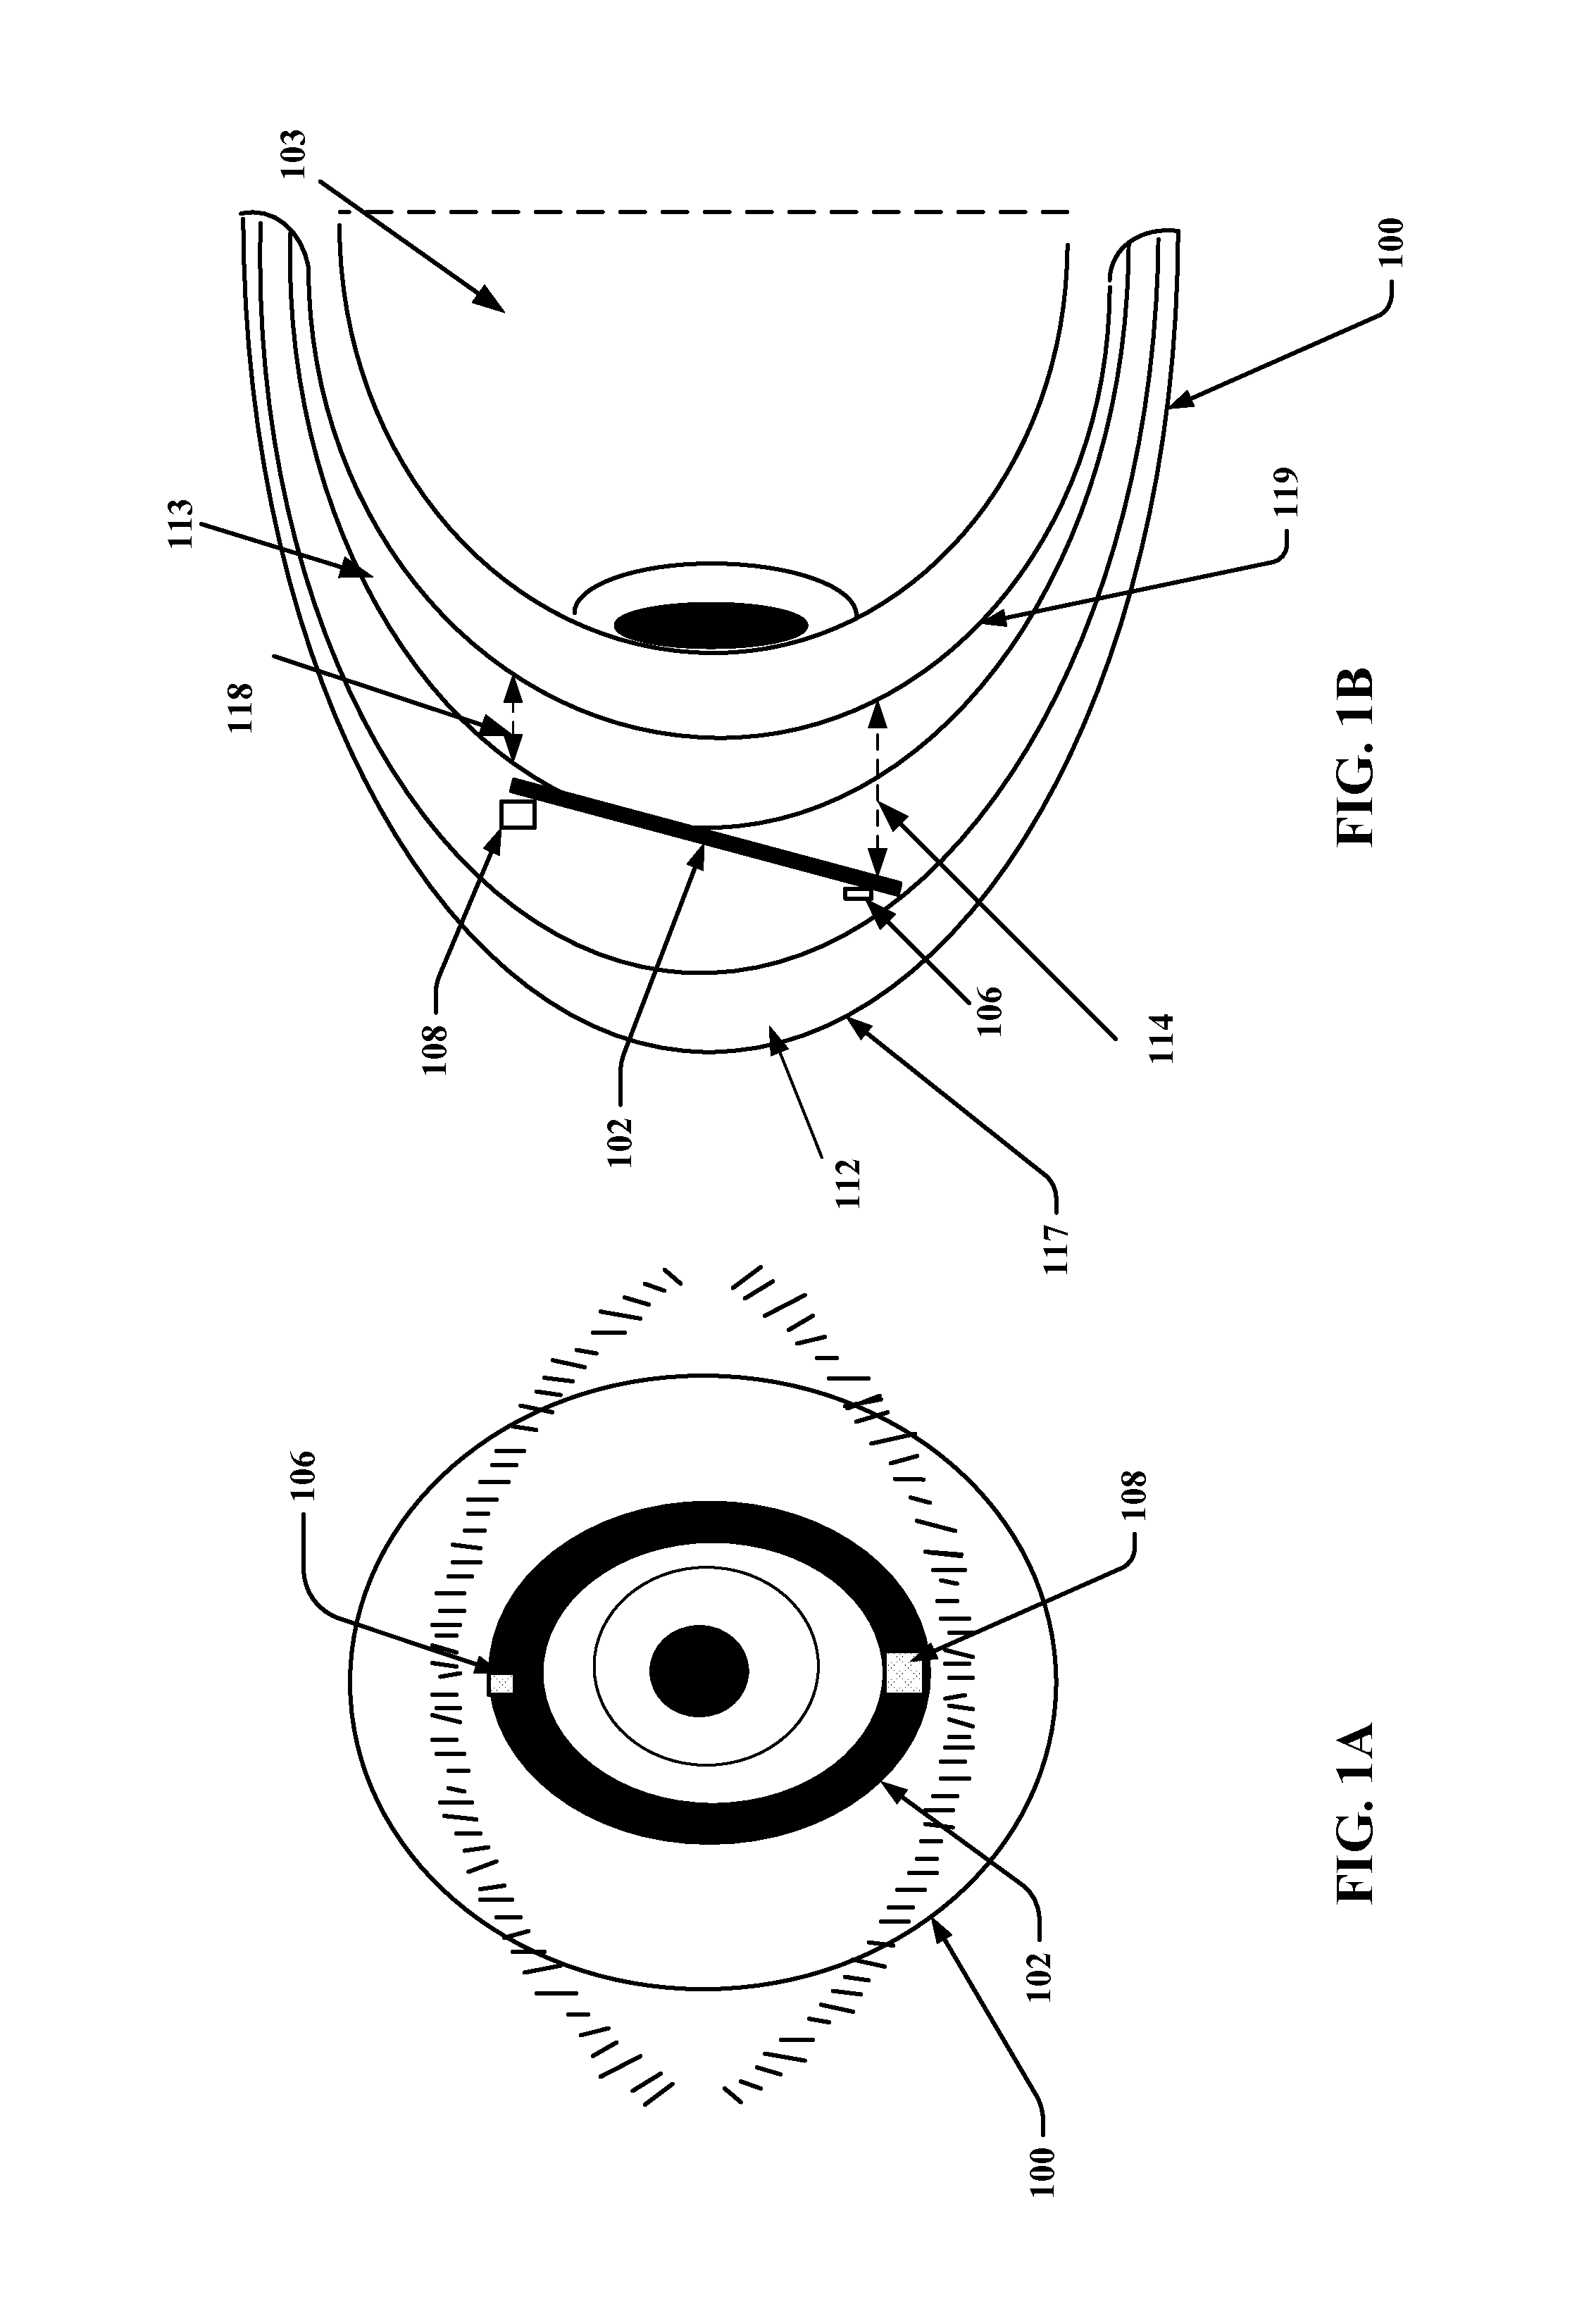 Contact lens and method of manufacture to improve sensor sensitivity